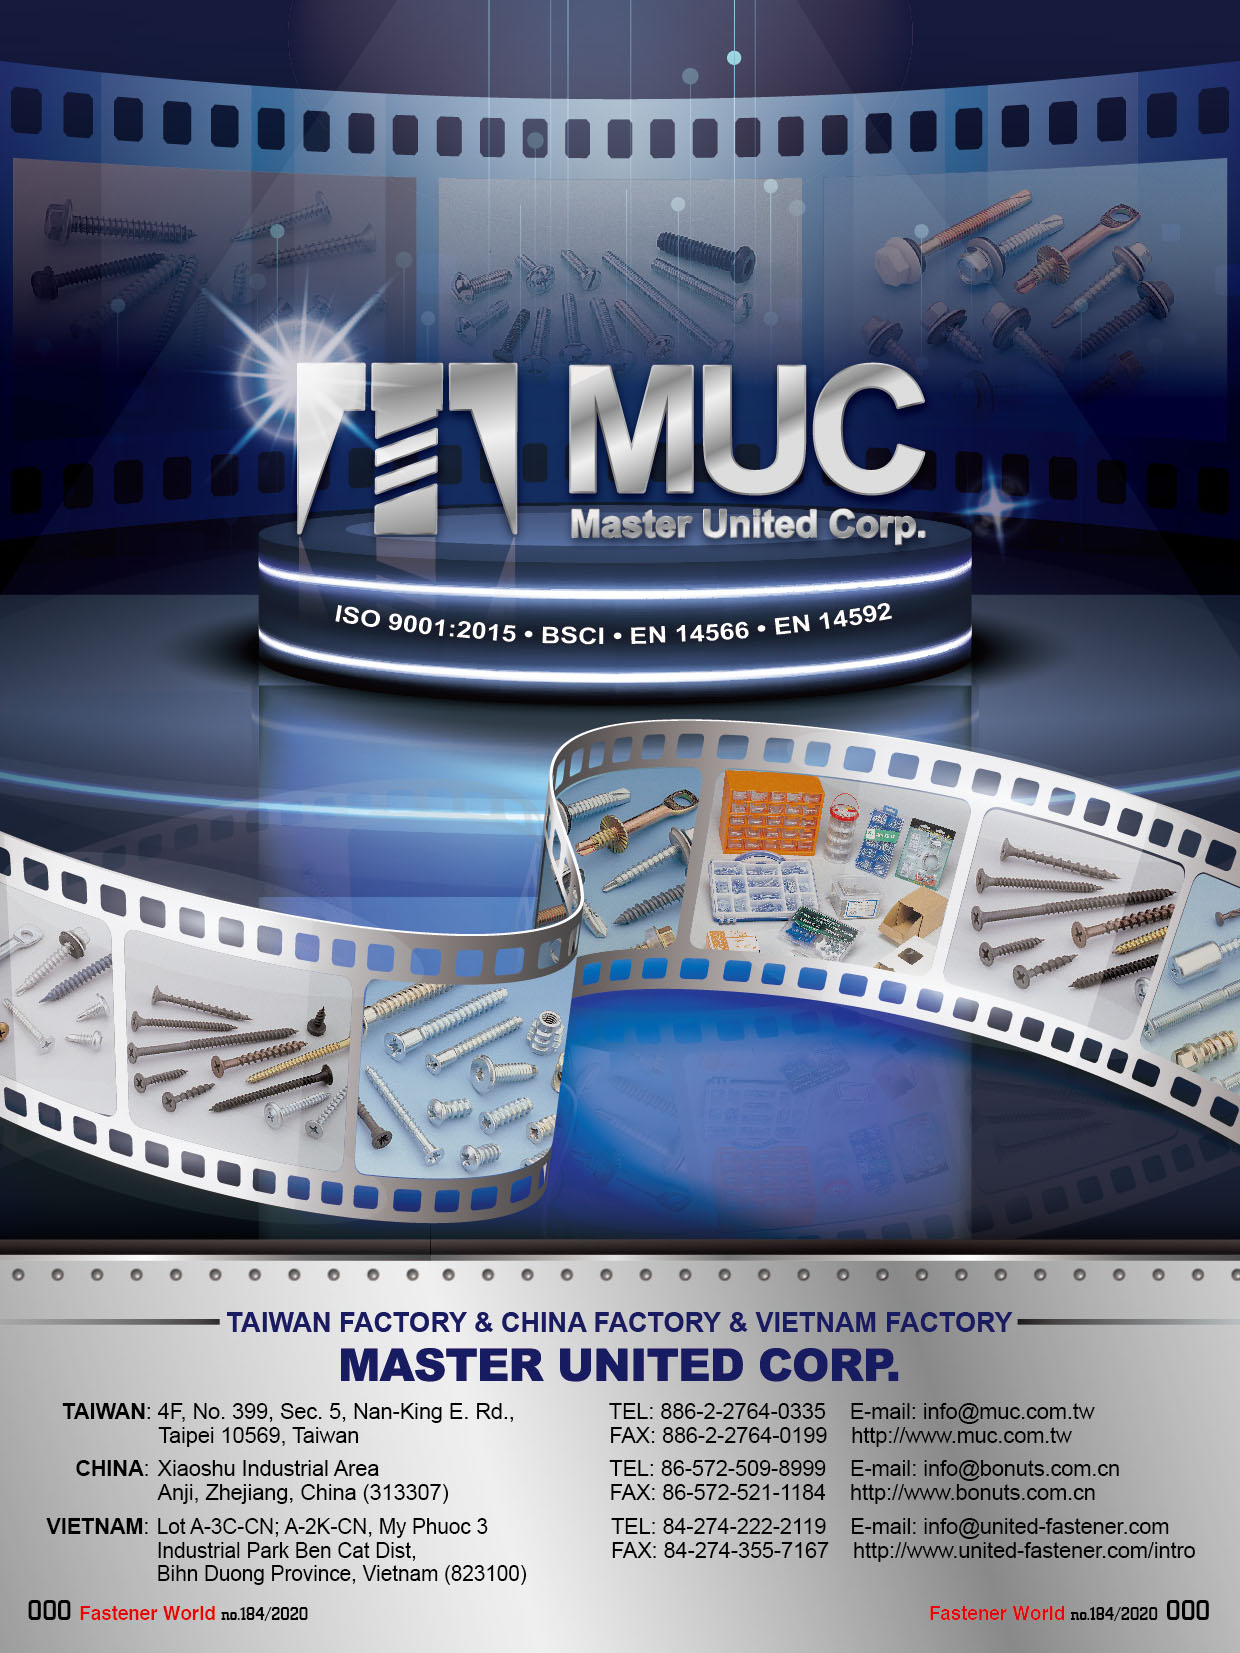 MASTER UNITED CORP.  , Furniture Screw, Connecting Screw, Euro Screw, Screw with Hole, Funnel Hi-Lo Screw, Counter Screw, Twinfast Wood Screw, Studs and Bolts, Allen Hex Keys,Furniture Stems,Threaded Dowels,Cross Dowels,Insert Nuts,K.D. Fitting,Cover Caps,Castor Stems,Anchors , Furniture Screws